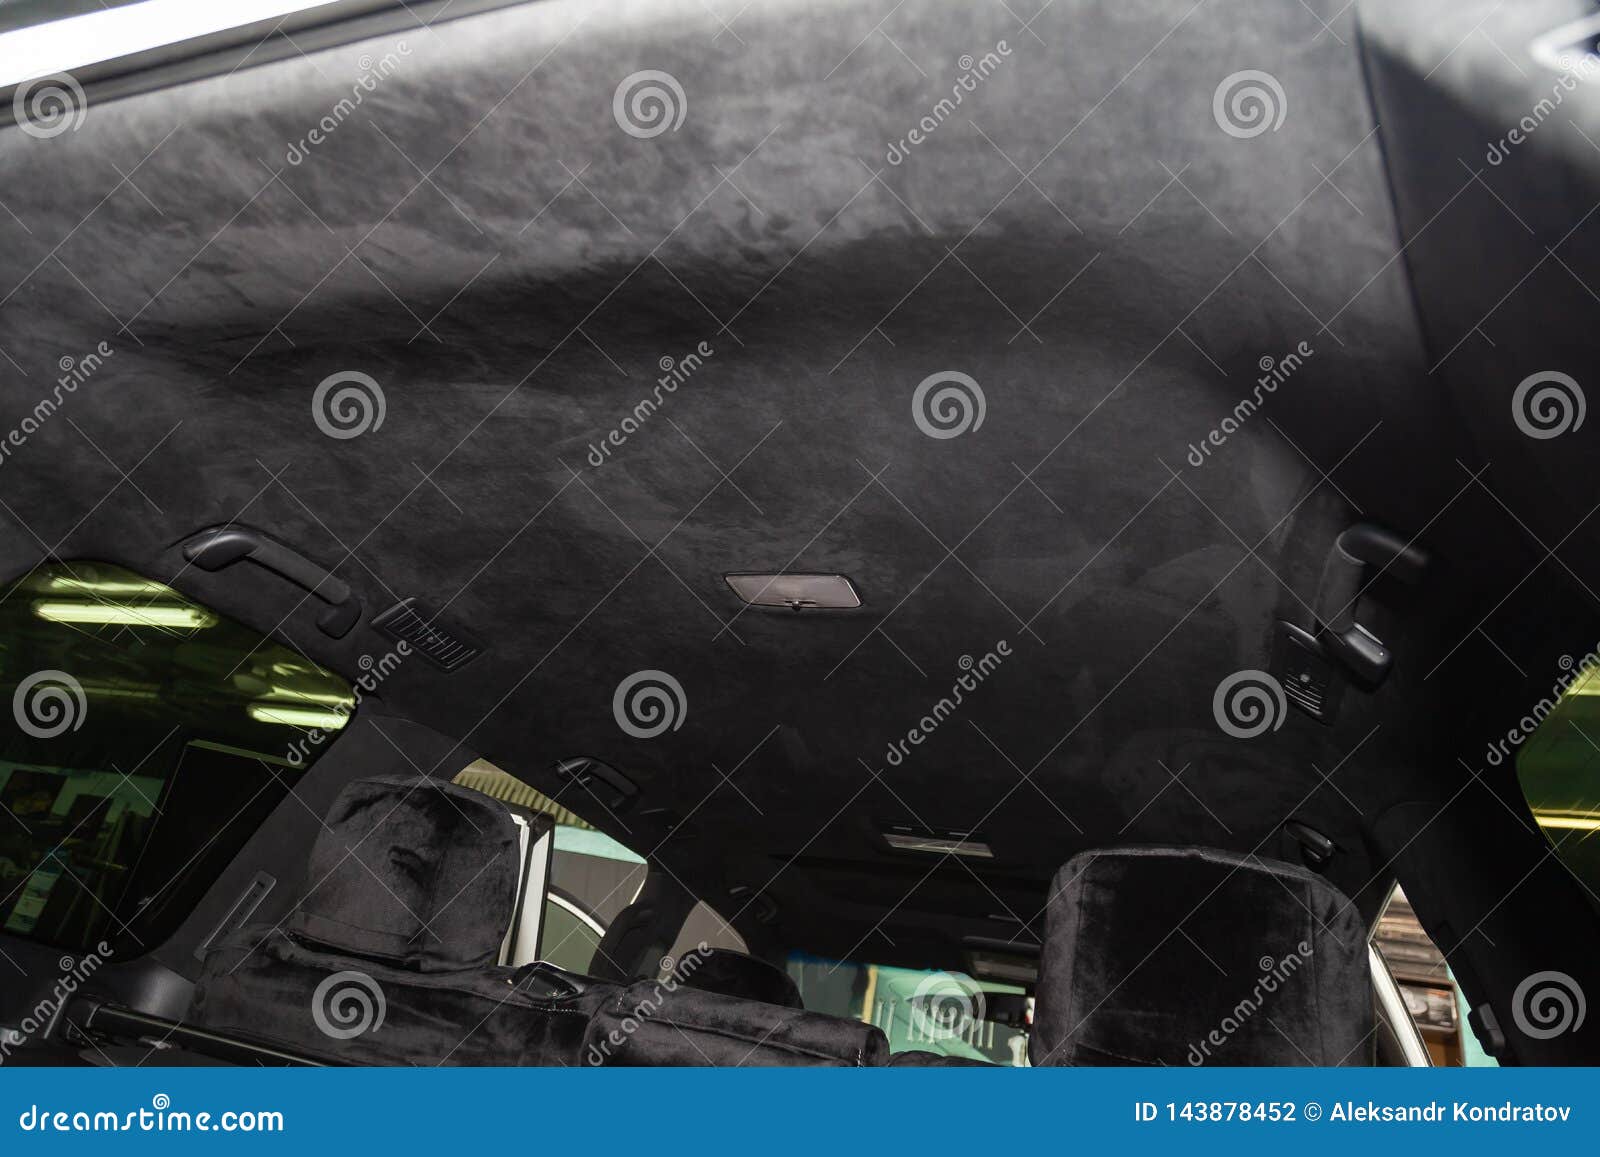 The Ceiling Of The Suv Car Pulled By Black Soft Material Alkantara